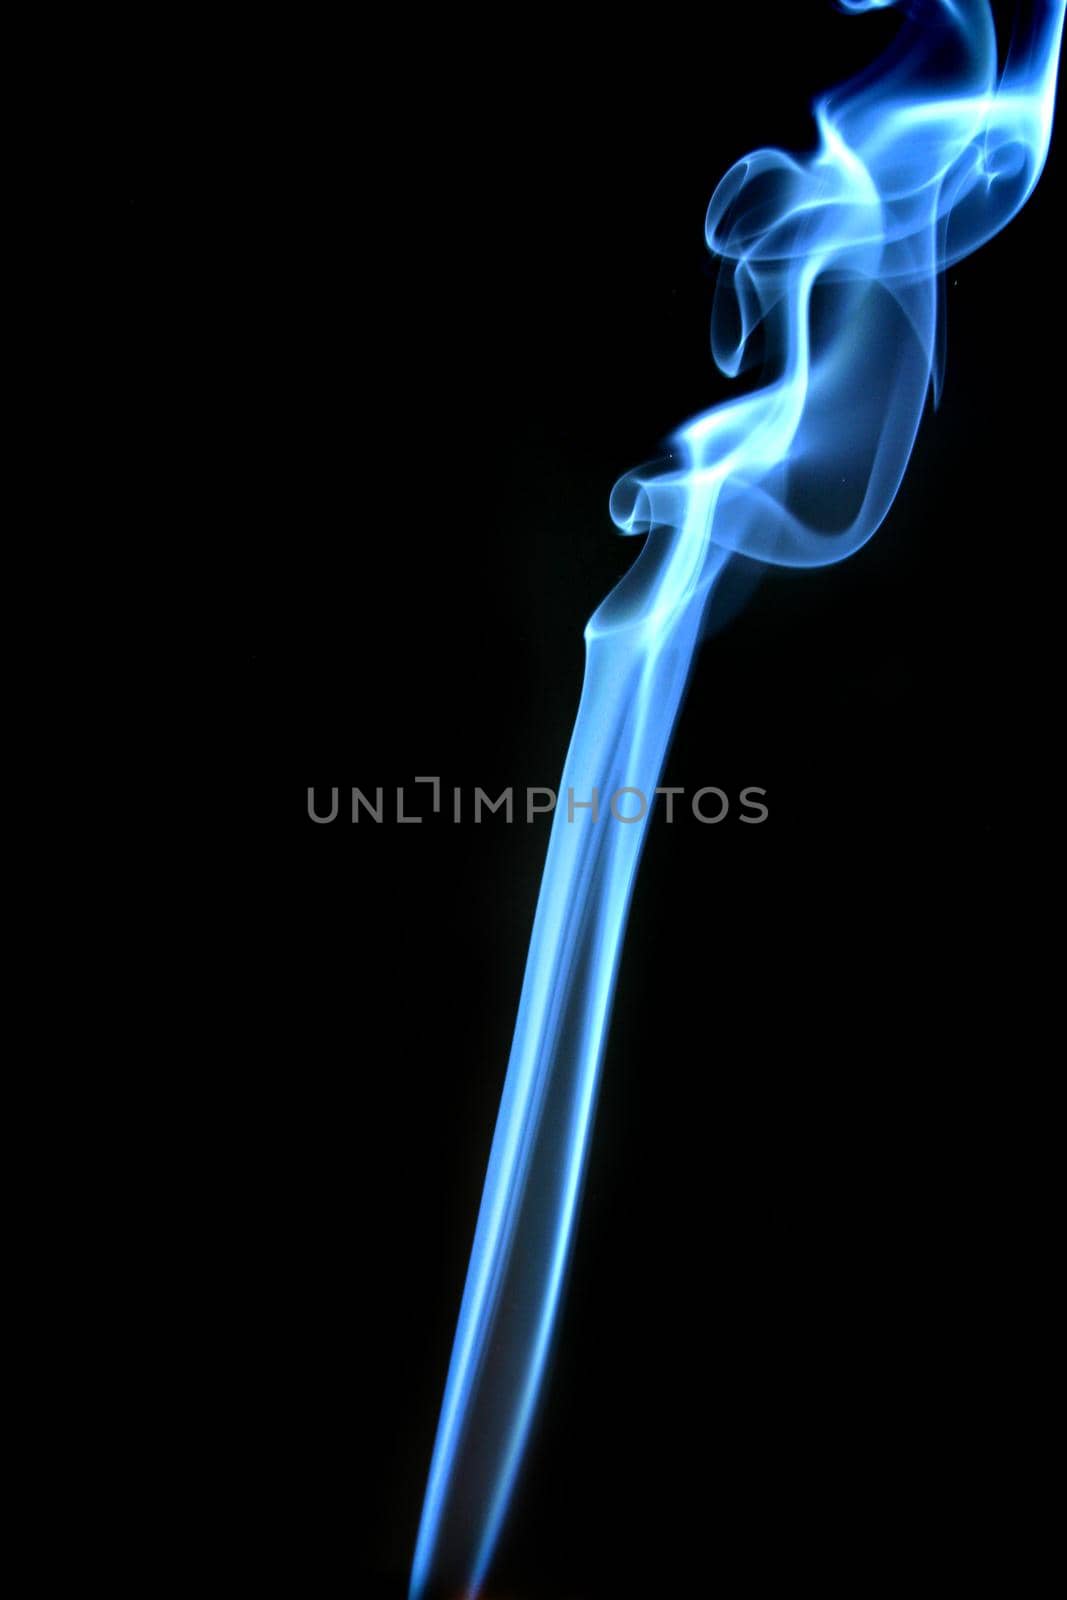 Image of Blue smoke trailing upwards in abstract form on a black background